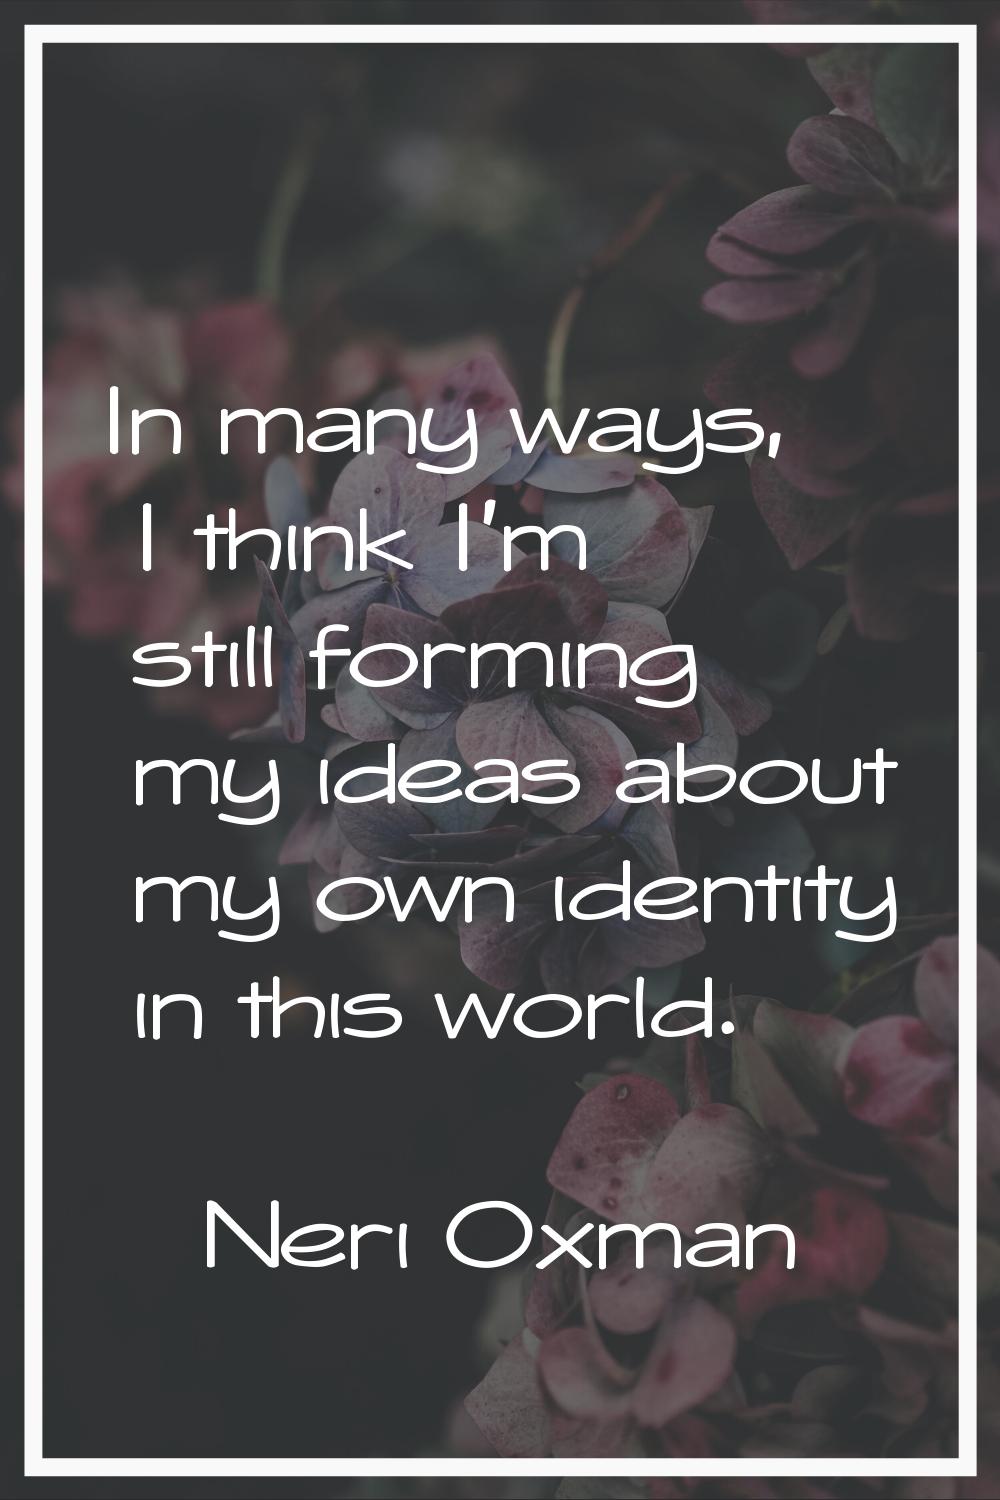 In many ways, I think I'm still forming my ideas about my own identity in this world.